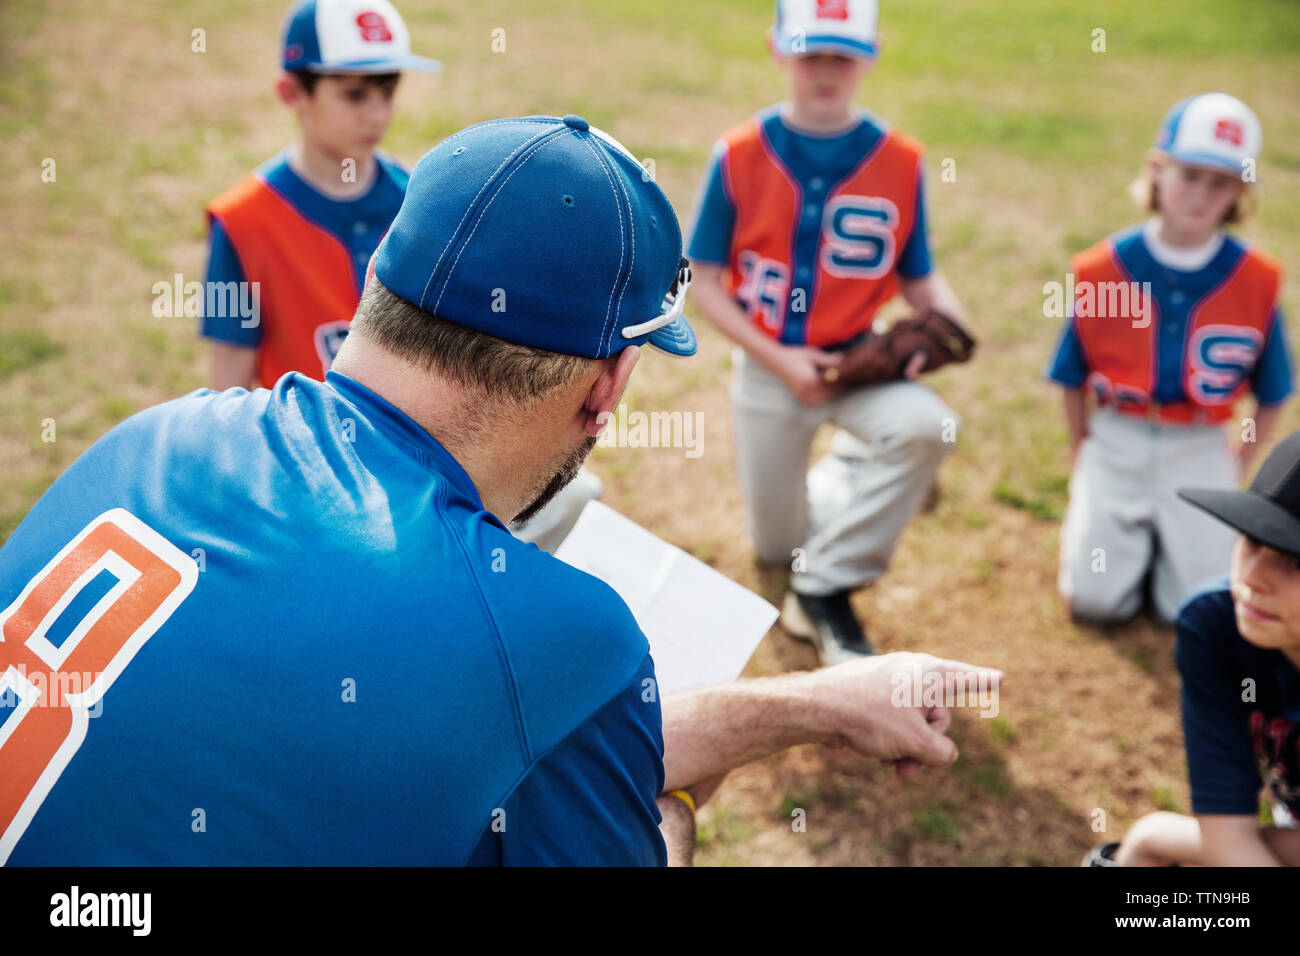 Rear view of coach pointing while discussing with baseball team on field Stock Photo